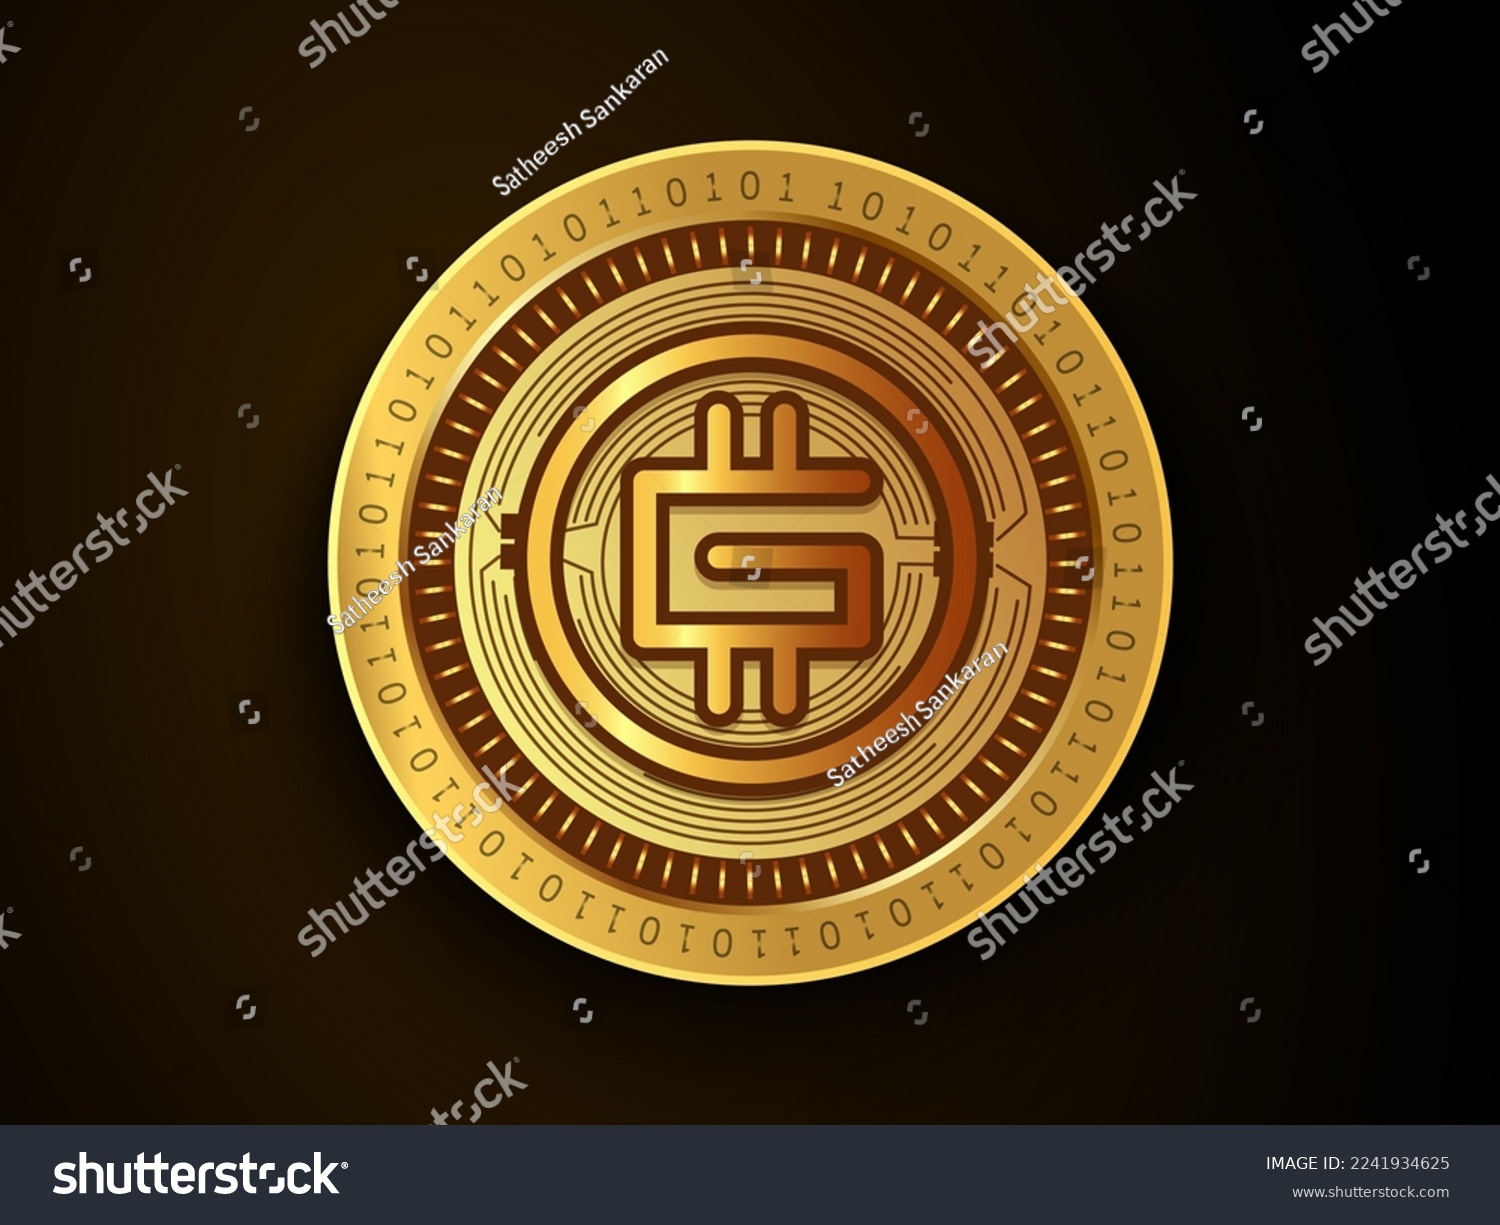 SVG of STEPN (GMT) crypto currency symbol and logo on gold coin. Virtual money concept token based on blockchain technology.  svg